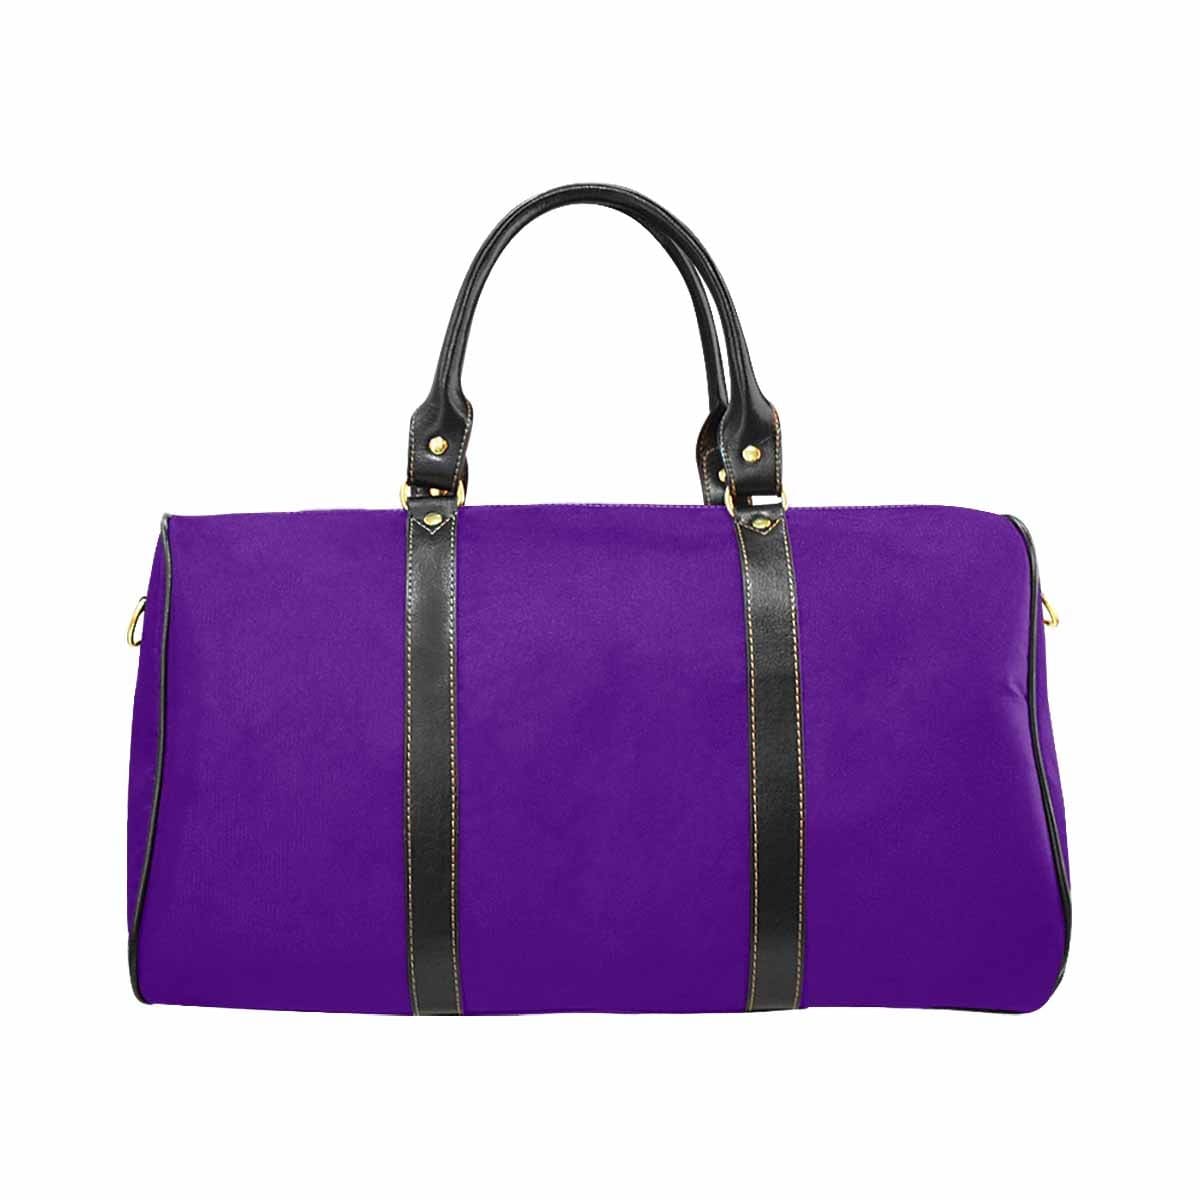 Travel Bag Leather Carry On Large Luggage Bag Indigo Purple - Bags | Travel Bags